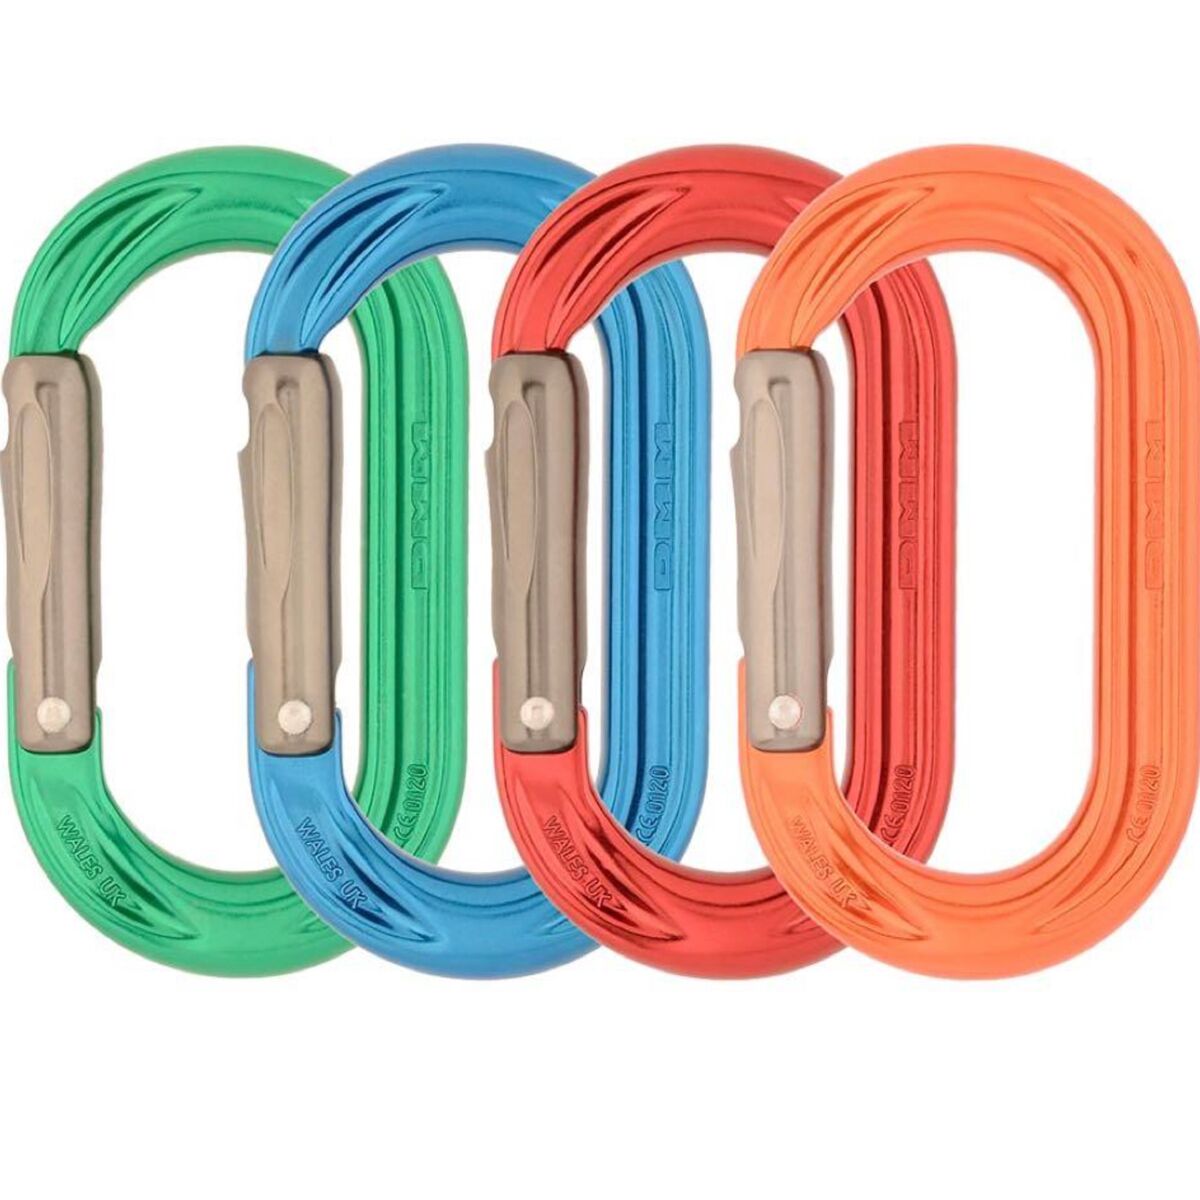 DMM PerfectO Straight Gate Carabiner - 4-Pack